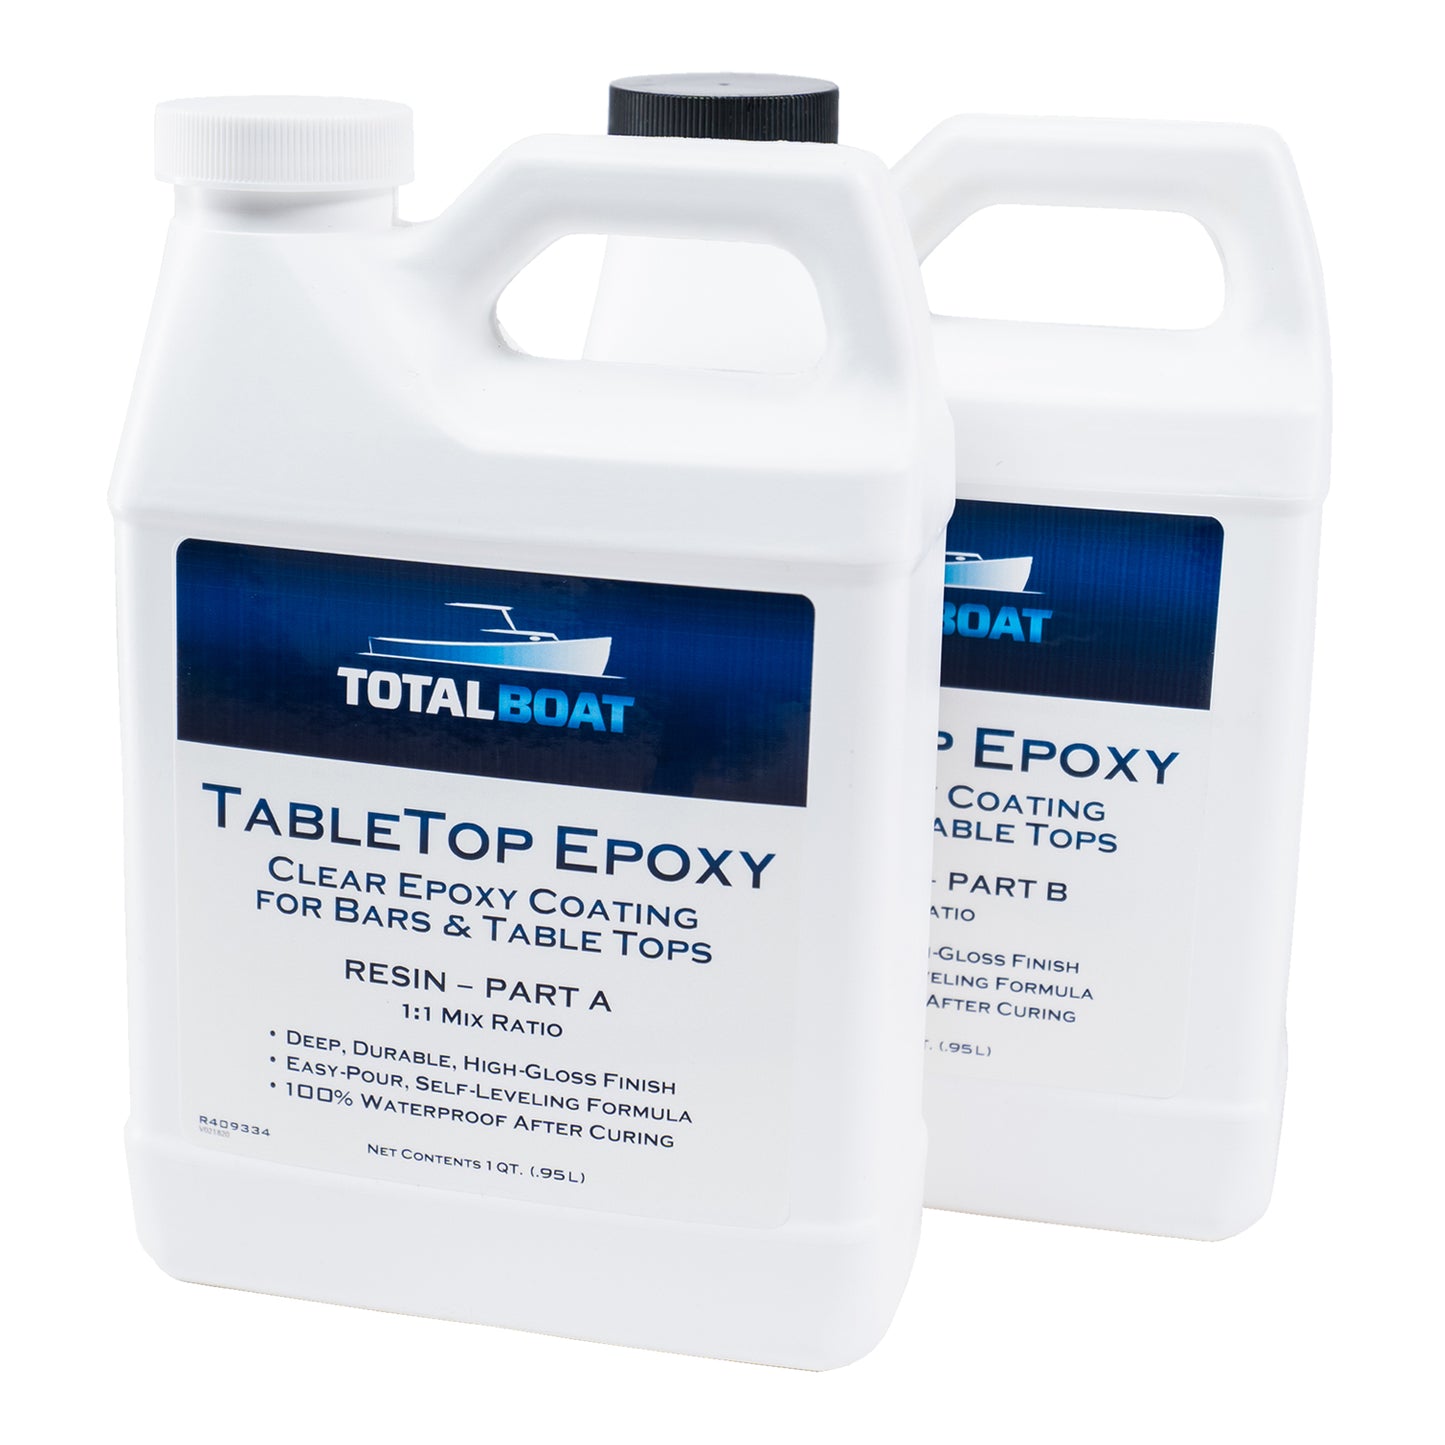 Clear Cote 2 Quart Epoxy Resin Craft Kit - Crystal Clear, Quick Setting, &  Self Leveling - Perfect for Countertop Topcoats, Arts & Crafts, and